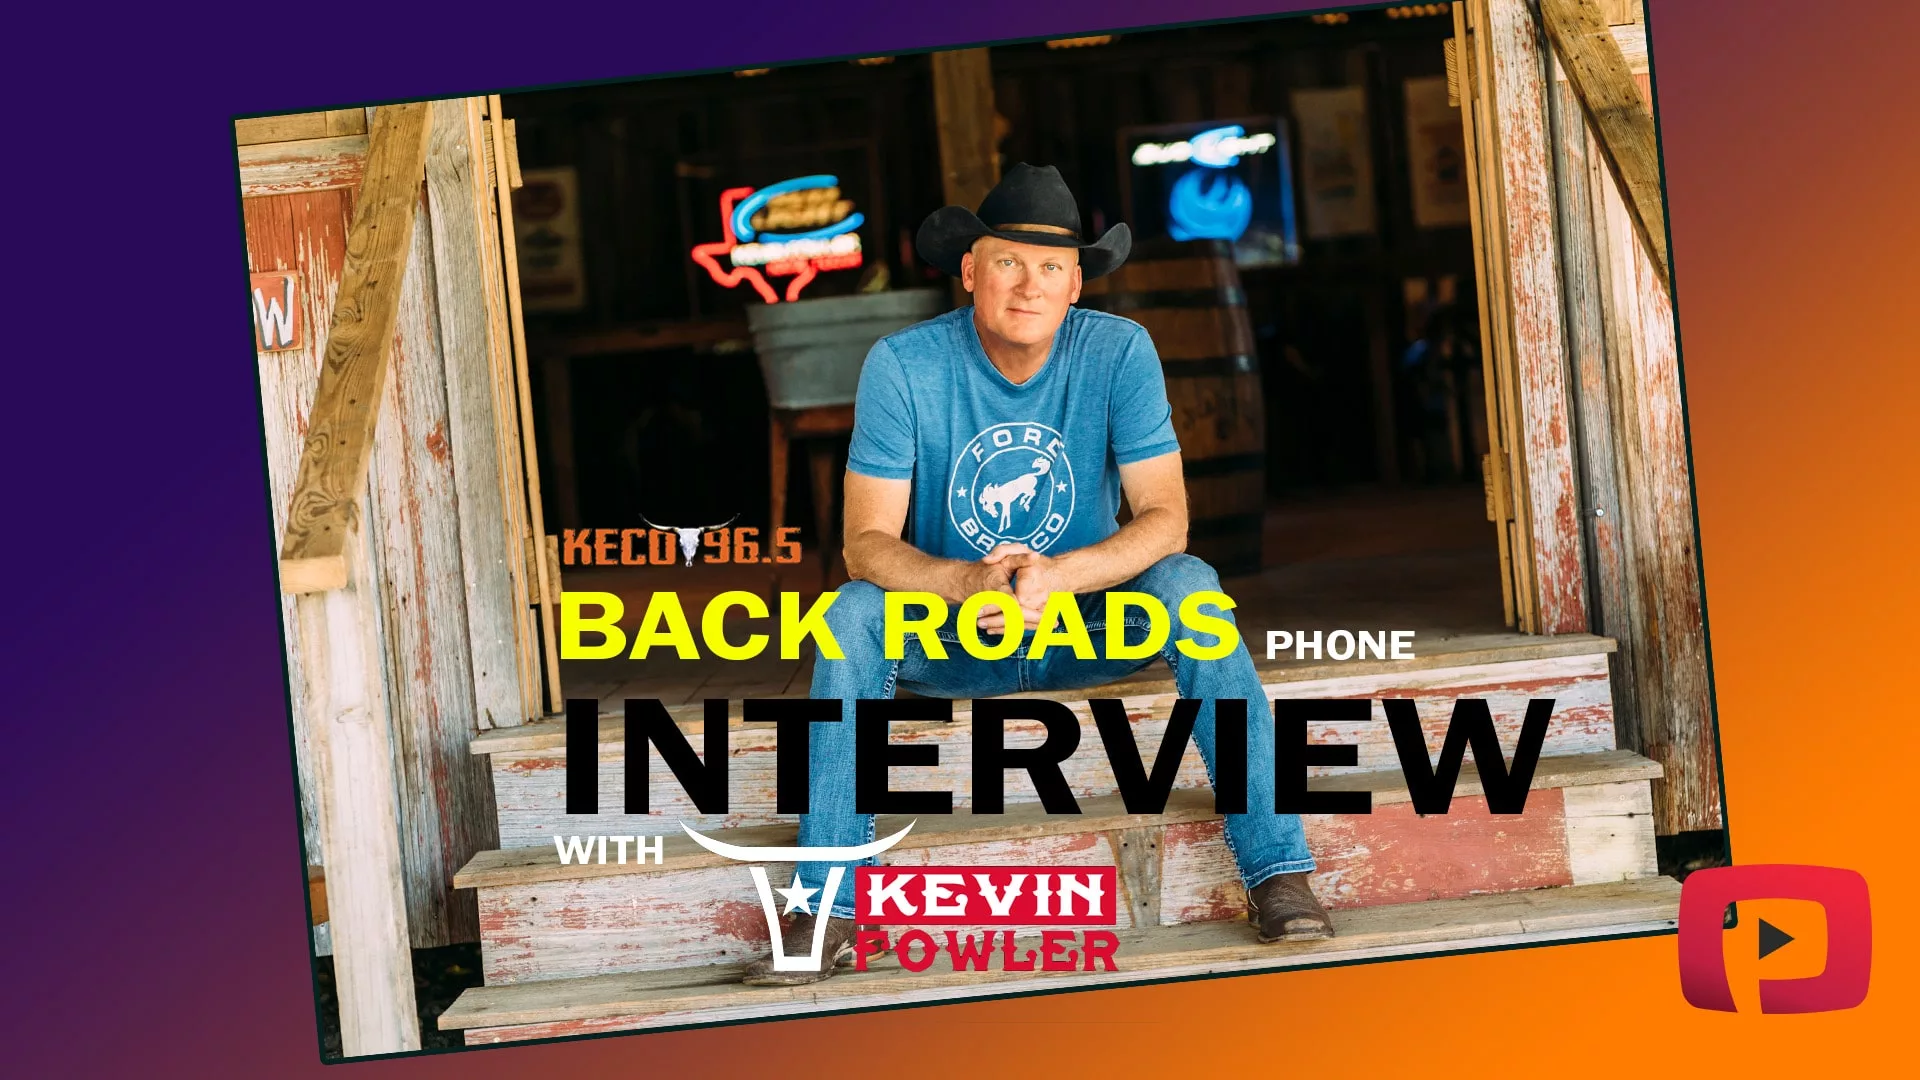 KECO Backroads Phone Interview featuring Kevin Fowler